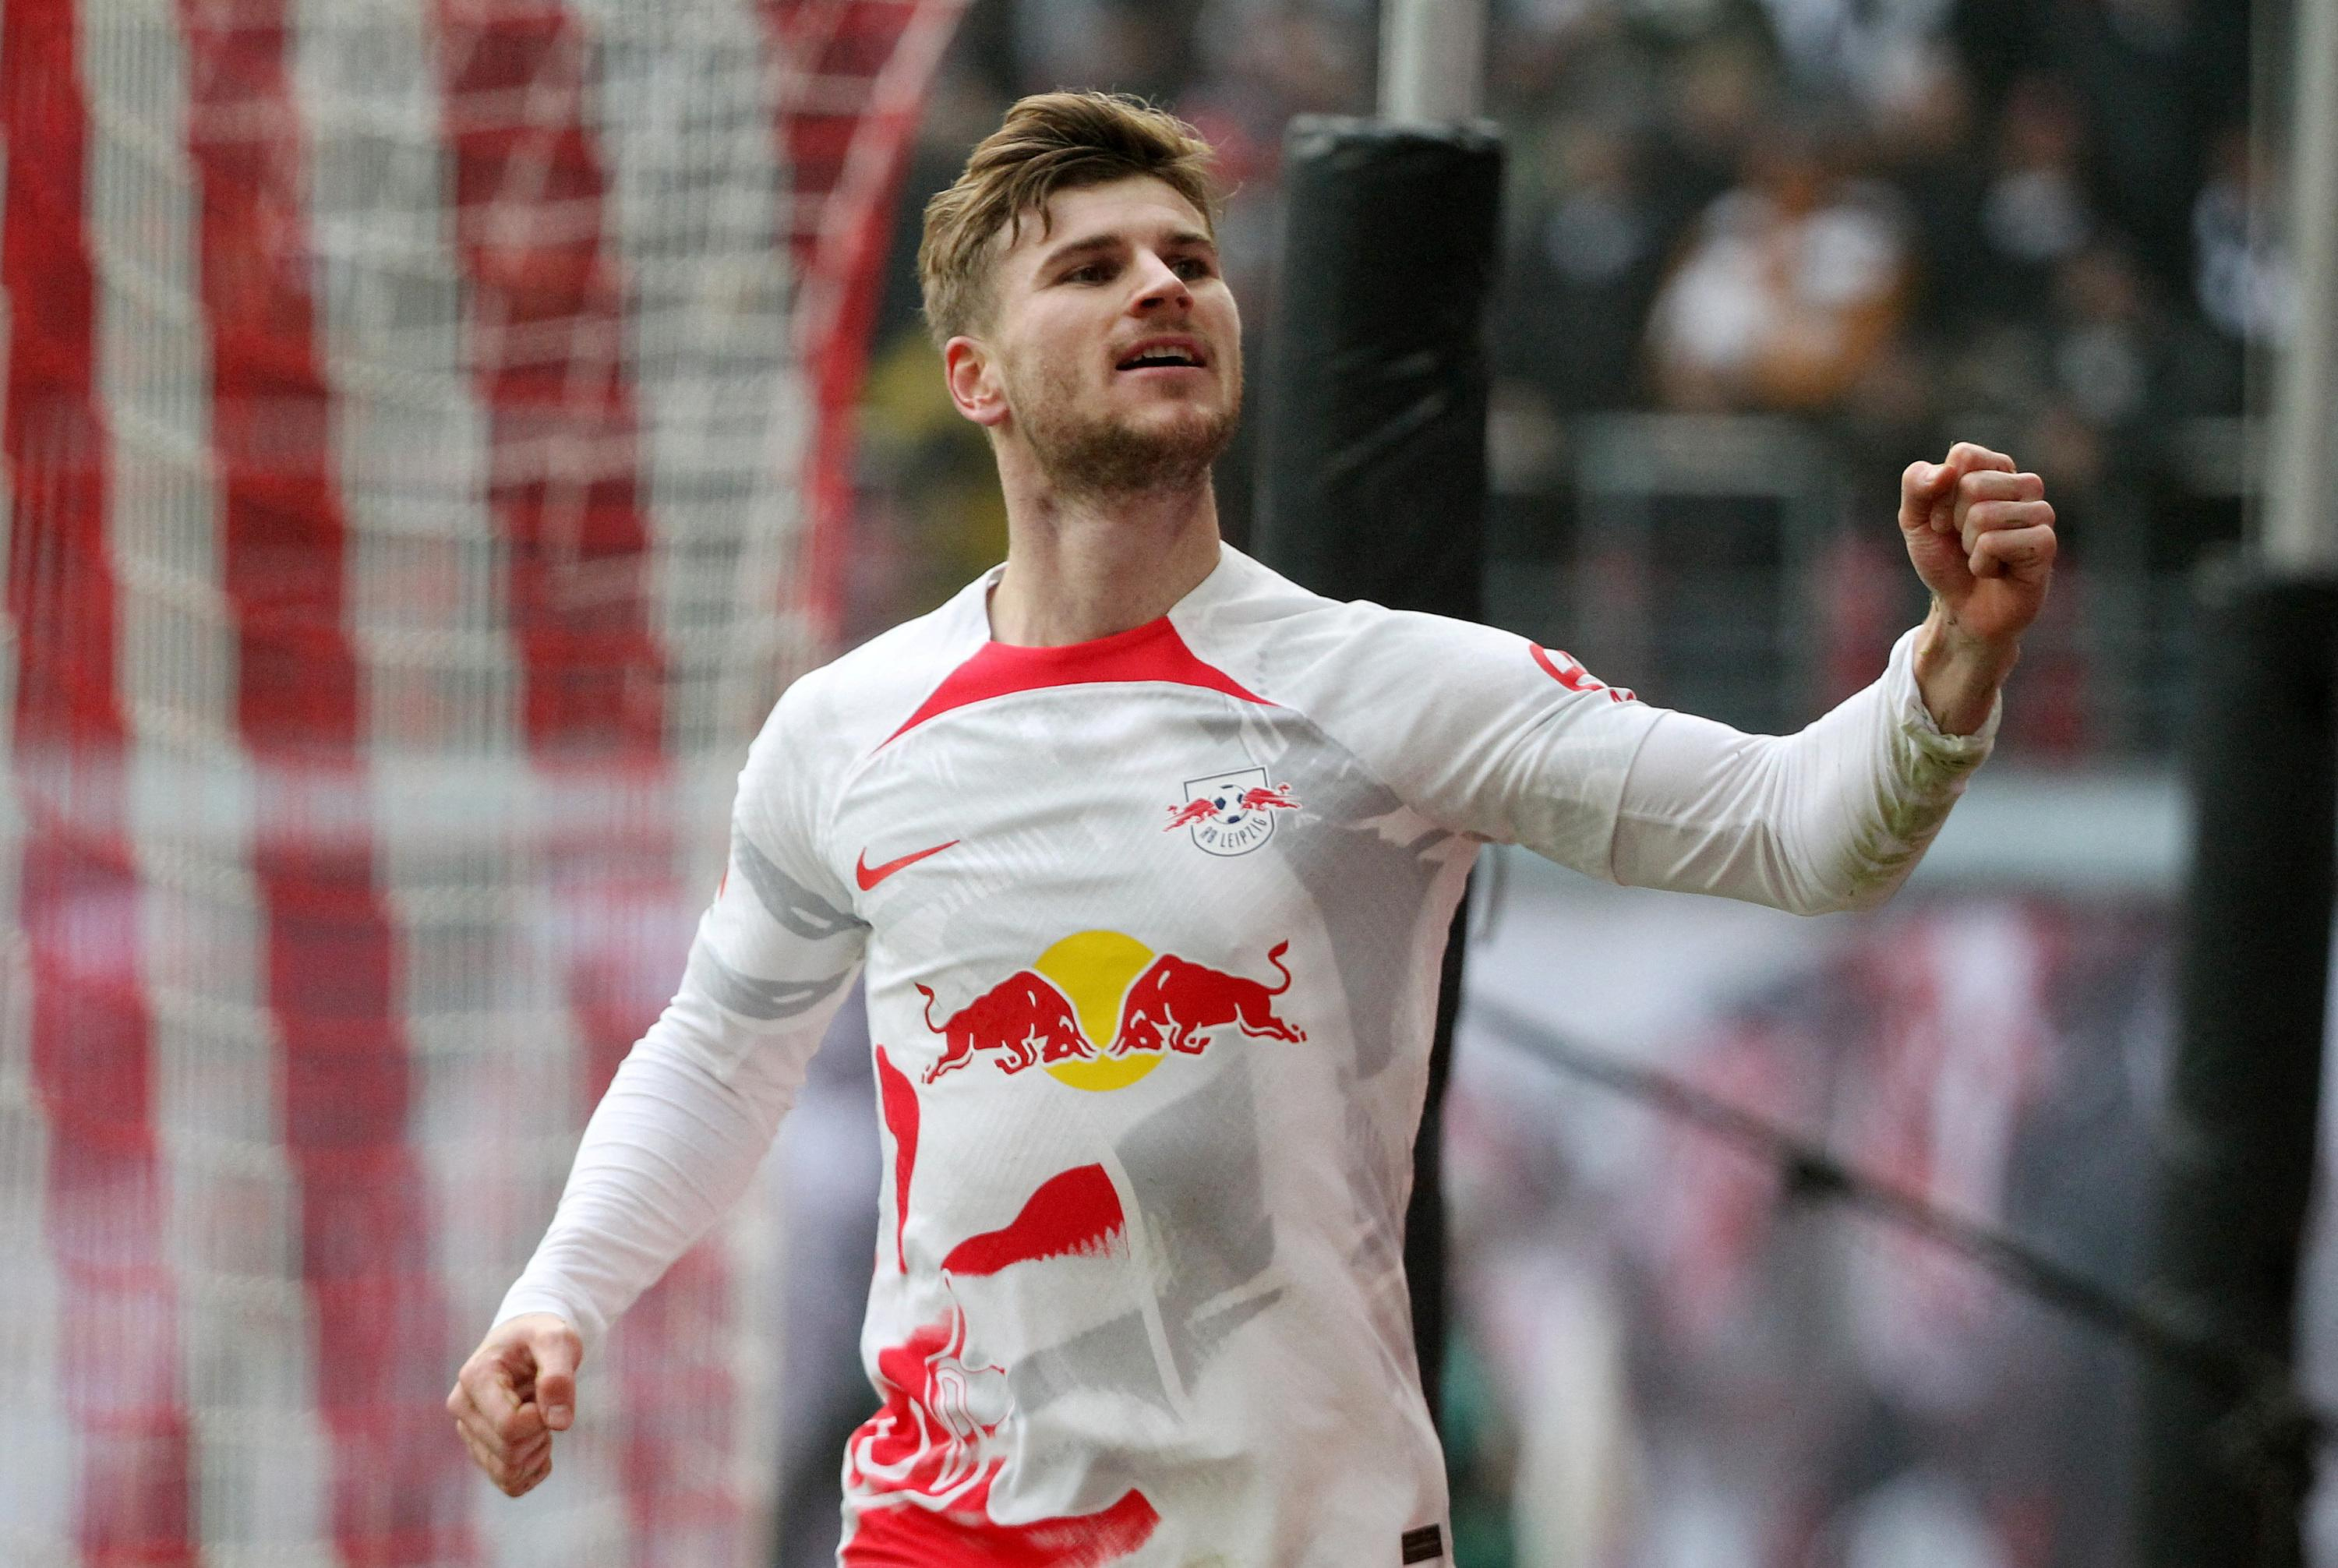 Premier League: Timo Werner arrives at Tottenham, on loan from Leipzig